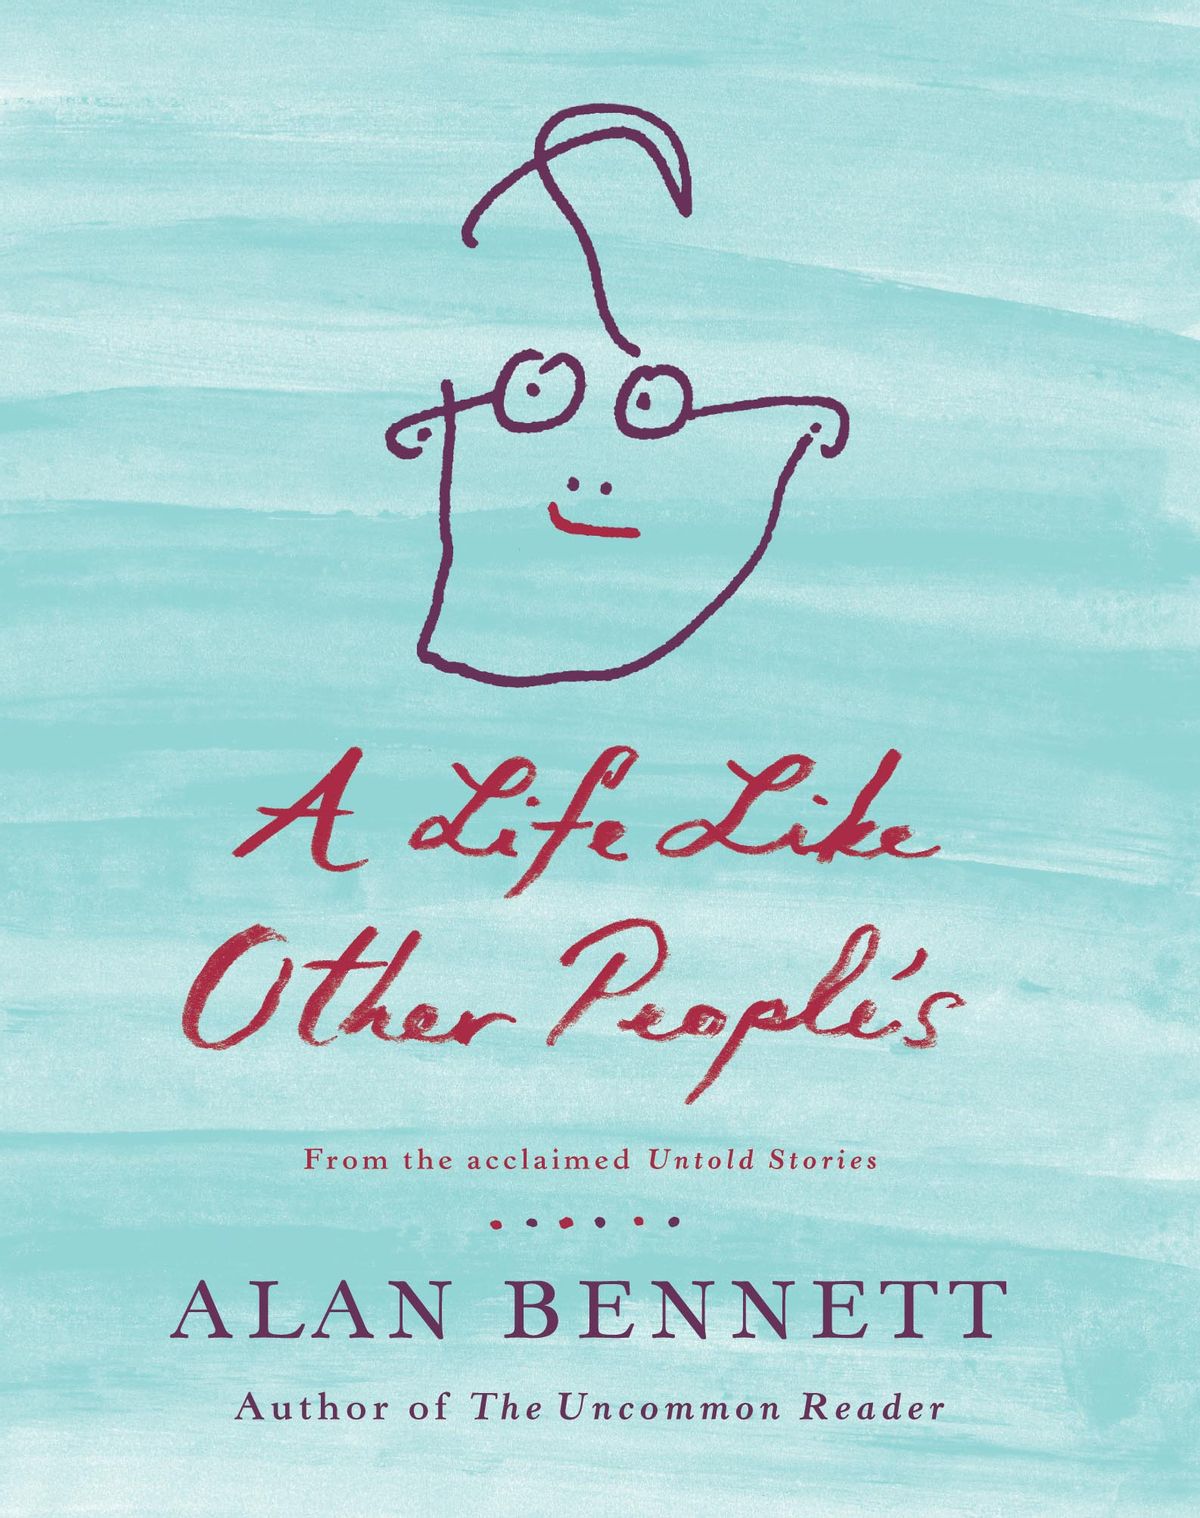 "A Life Like Other People's," by Alan Bennett